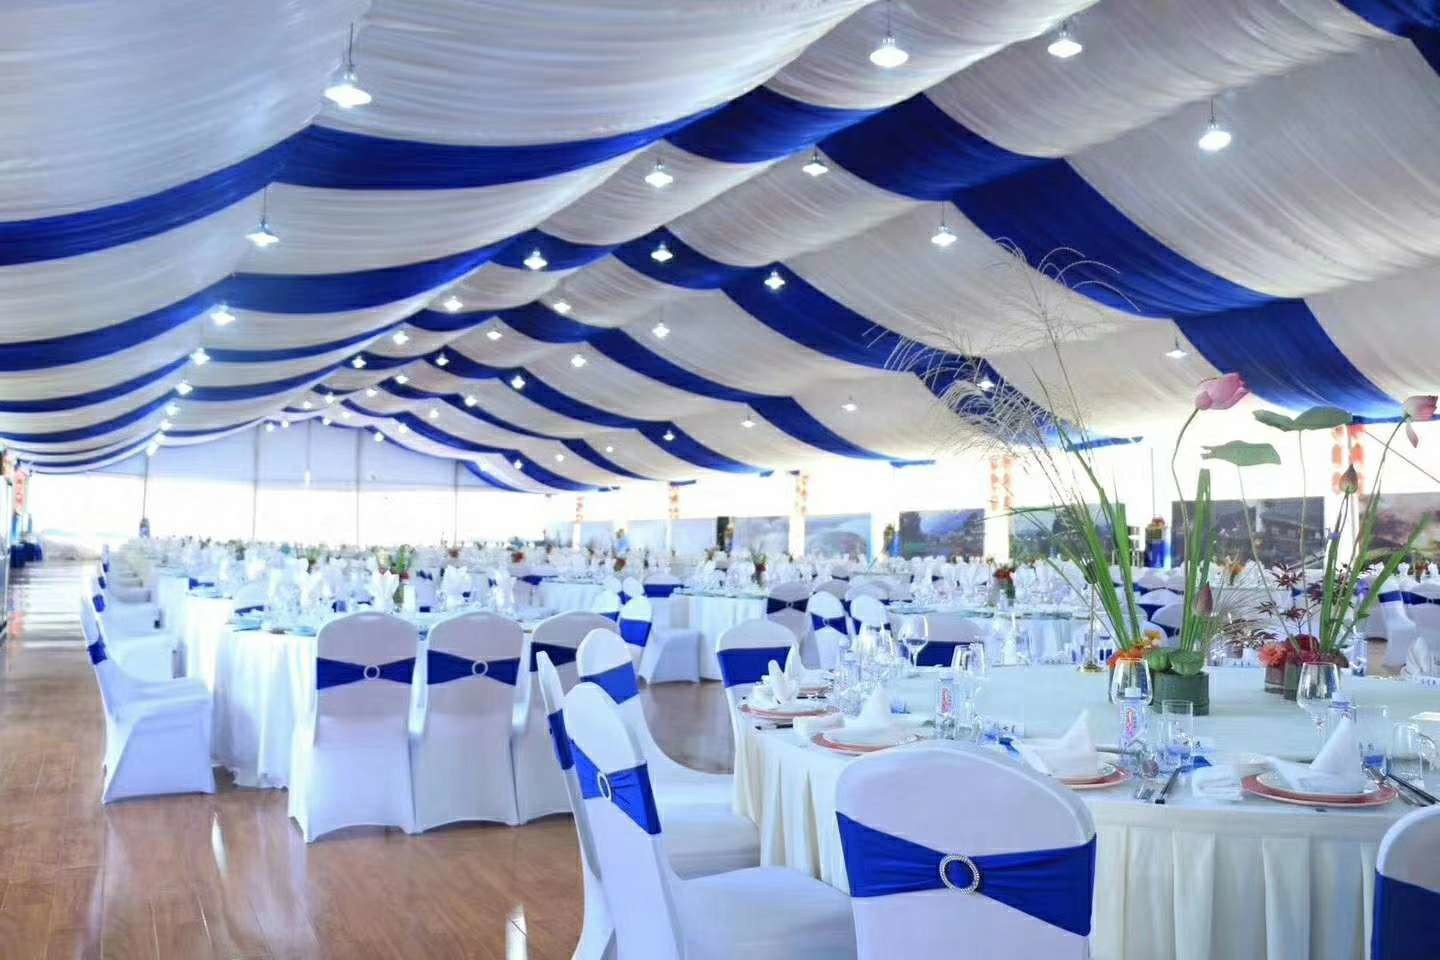 Luxury Marquee Outside Wedding Tents Banquet Hall Tent For Event Parties